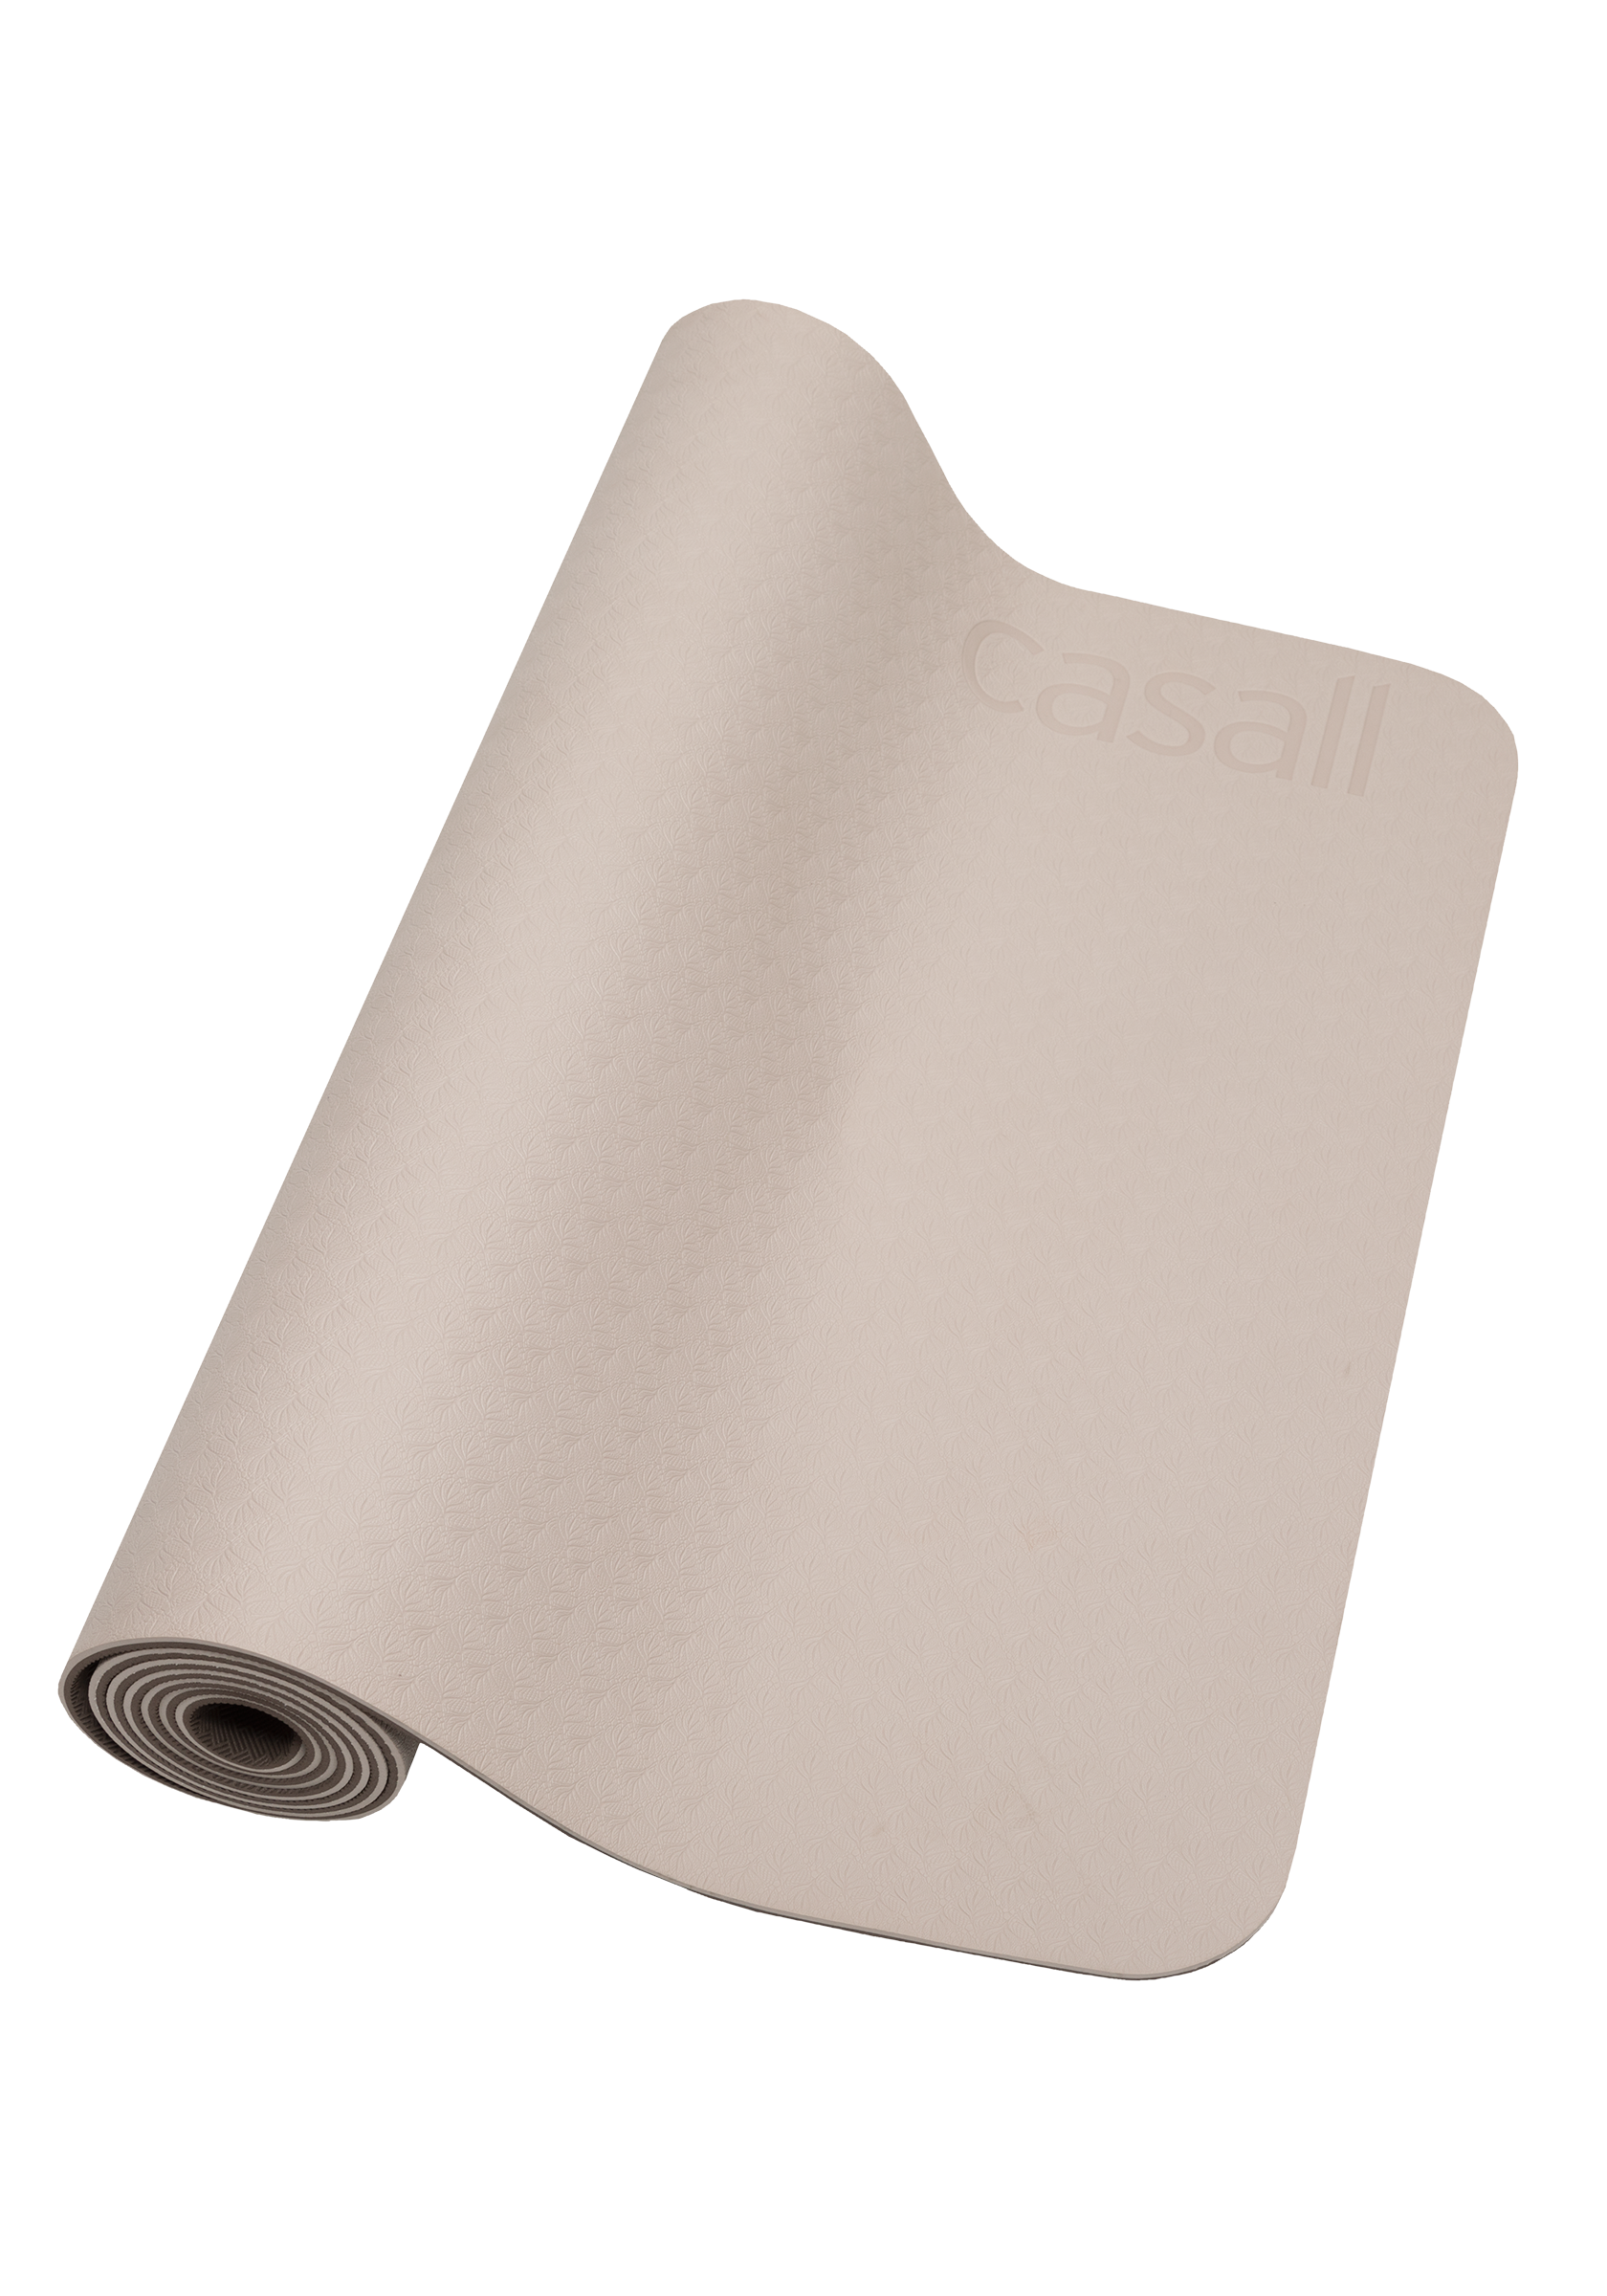 Yoga mat position 4mm - Sand/grounded brown